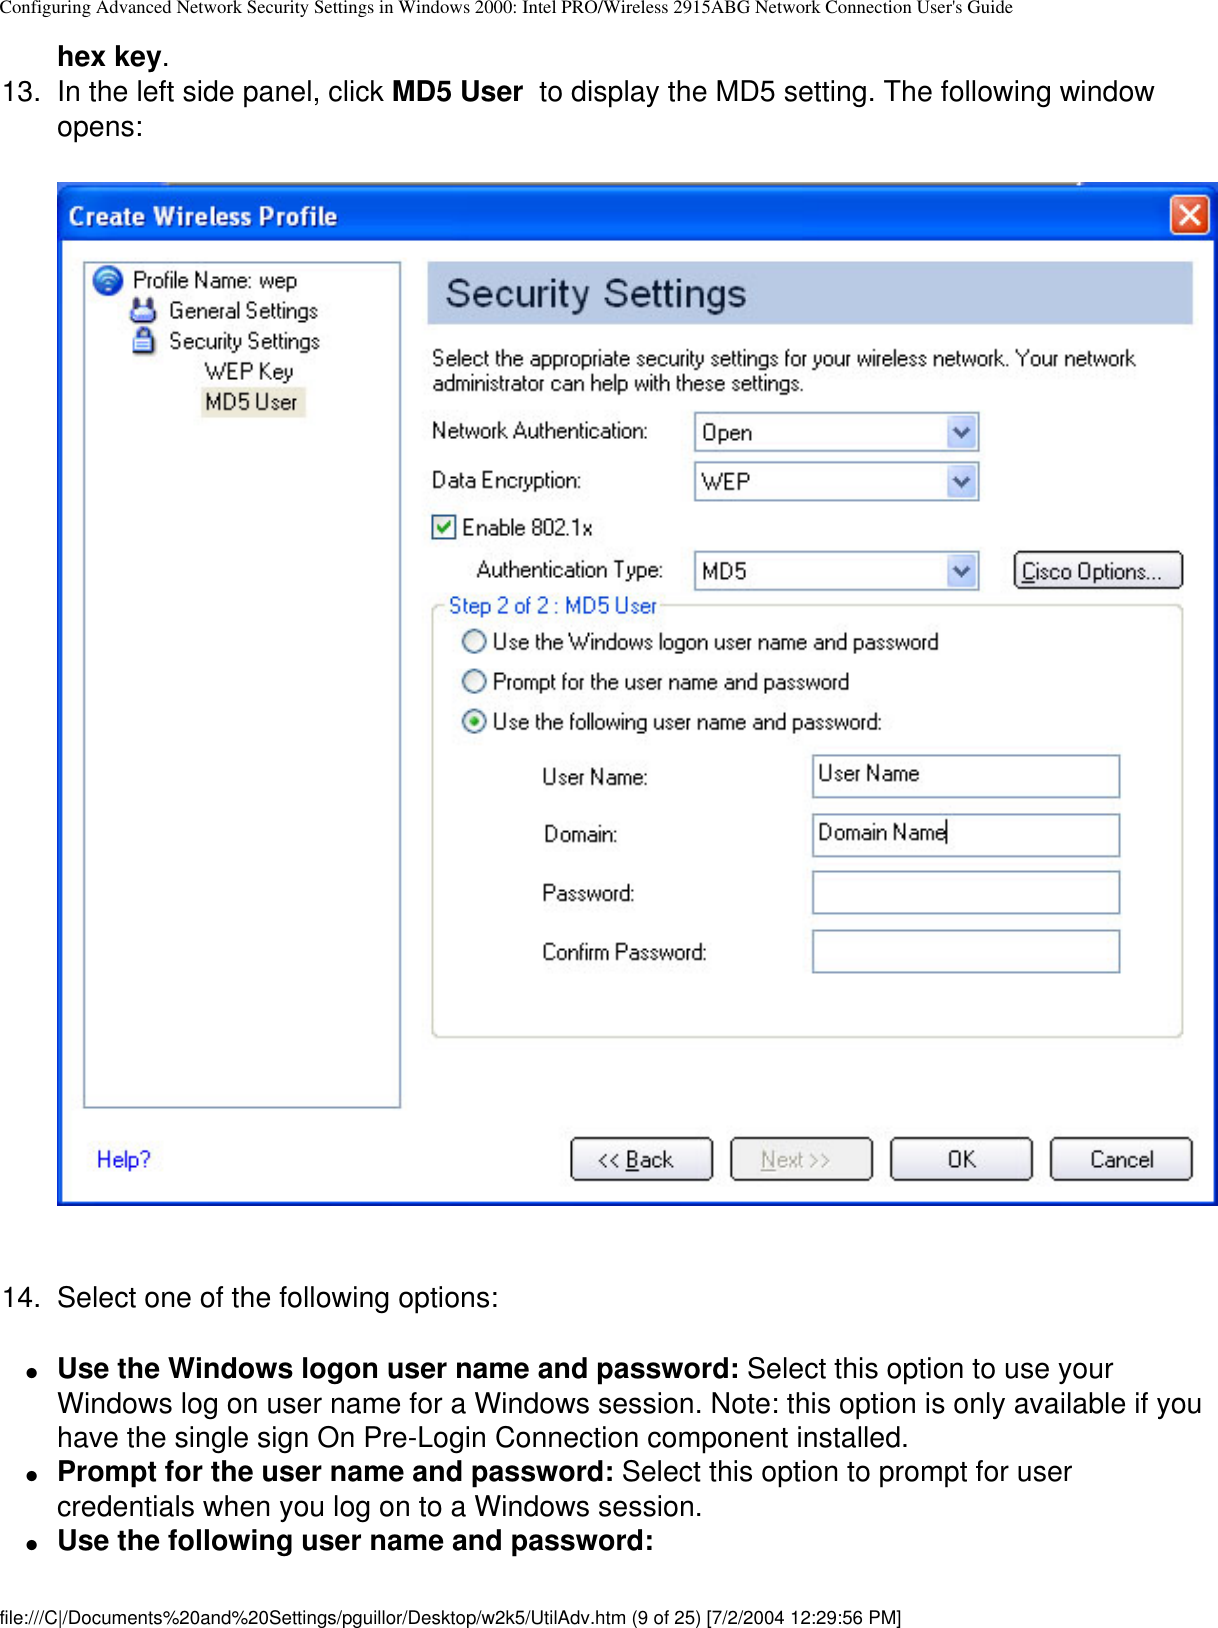 Configuring Advanced Network Security Settings in Windows 2000: Intel PRO/Wireless 2915ABG Network Connection User&apos;s Guidehex key.13.  In the left side panel, click MD5 User  to display the MD5 setting. The following window opens:  14.  Select one of the following options:●     Use the Windows logon user name and password: Select this option to use your Windows log on user name for a Windows session. Note: this option is only available if you have the single sign On Pre-Login Connection component installed.●     Prompt for the user name and password: Select this option to prompt for user credentials when you log on to a Windows session.●     Use the following user name and password: file:///C|/Documents%20and%20Settings/pguillor/Desktop/w2k5/UtilAdv.htm (9 of 25) [7/2/2004 12:29:56 PM]